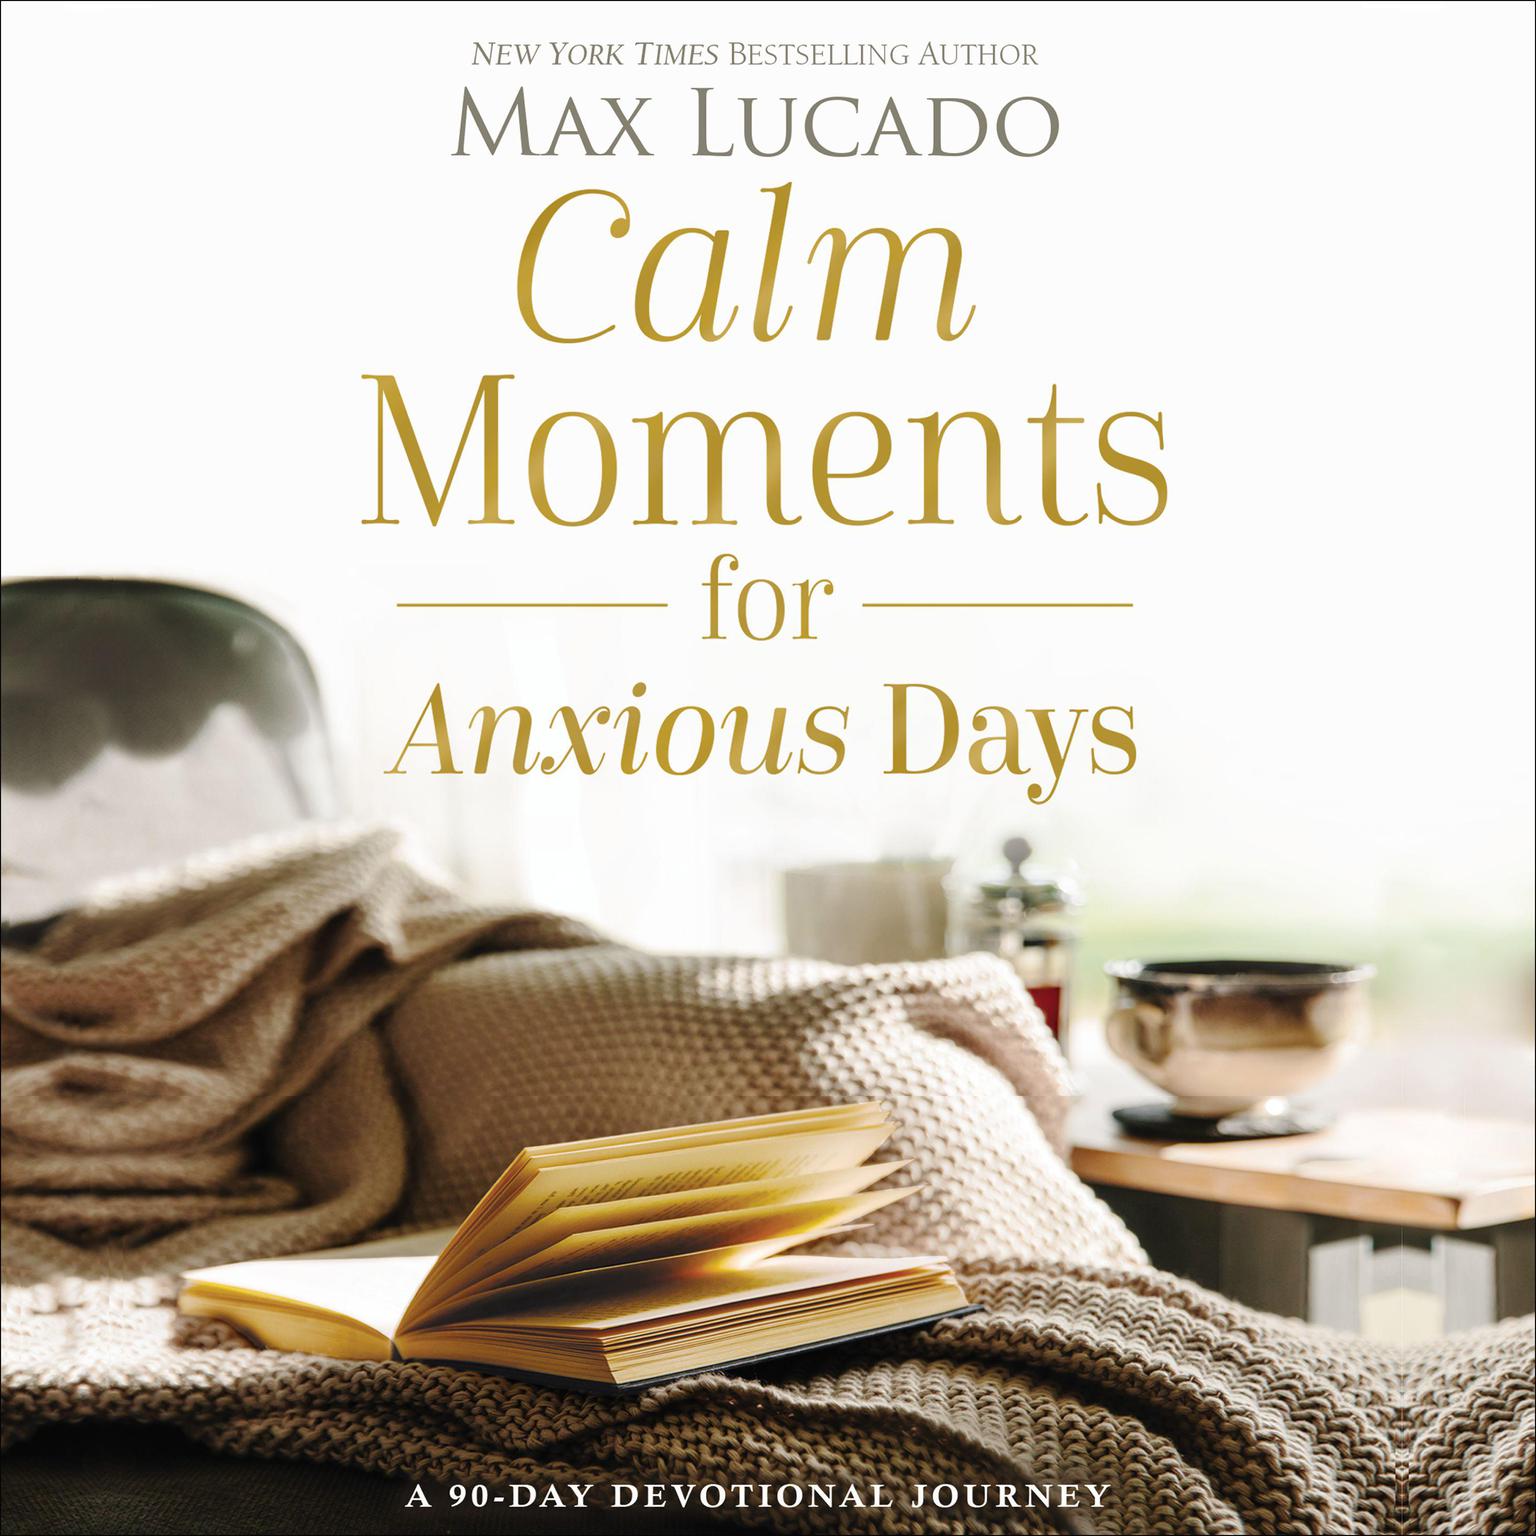 Calm Moments for Anxious Days: A 90-Day Devotional Journey Audiobook, by Max Lucado